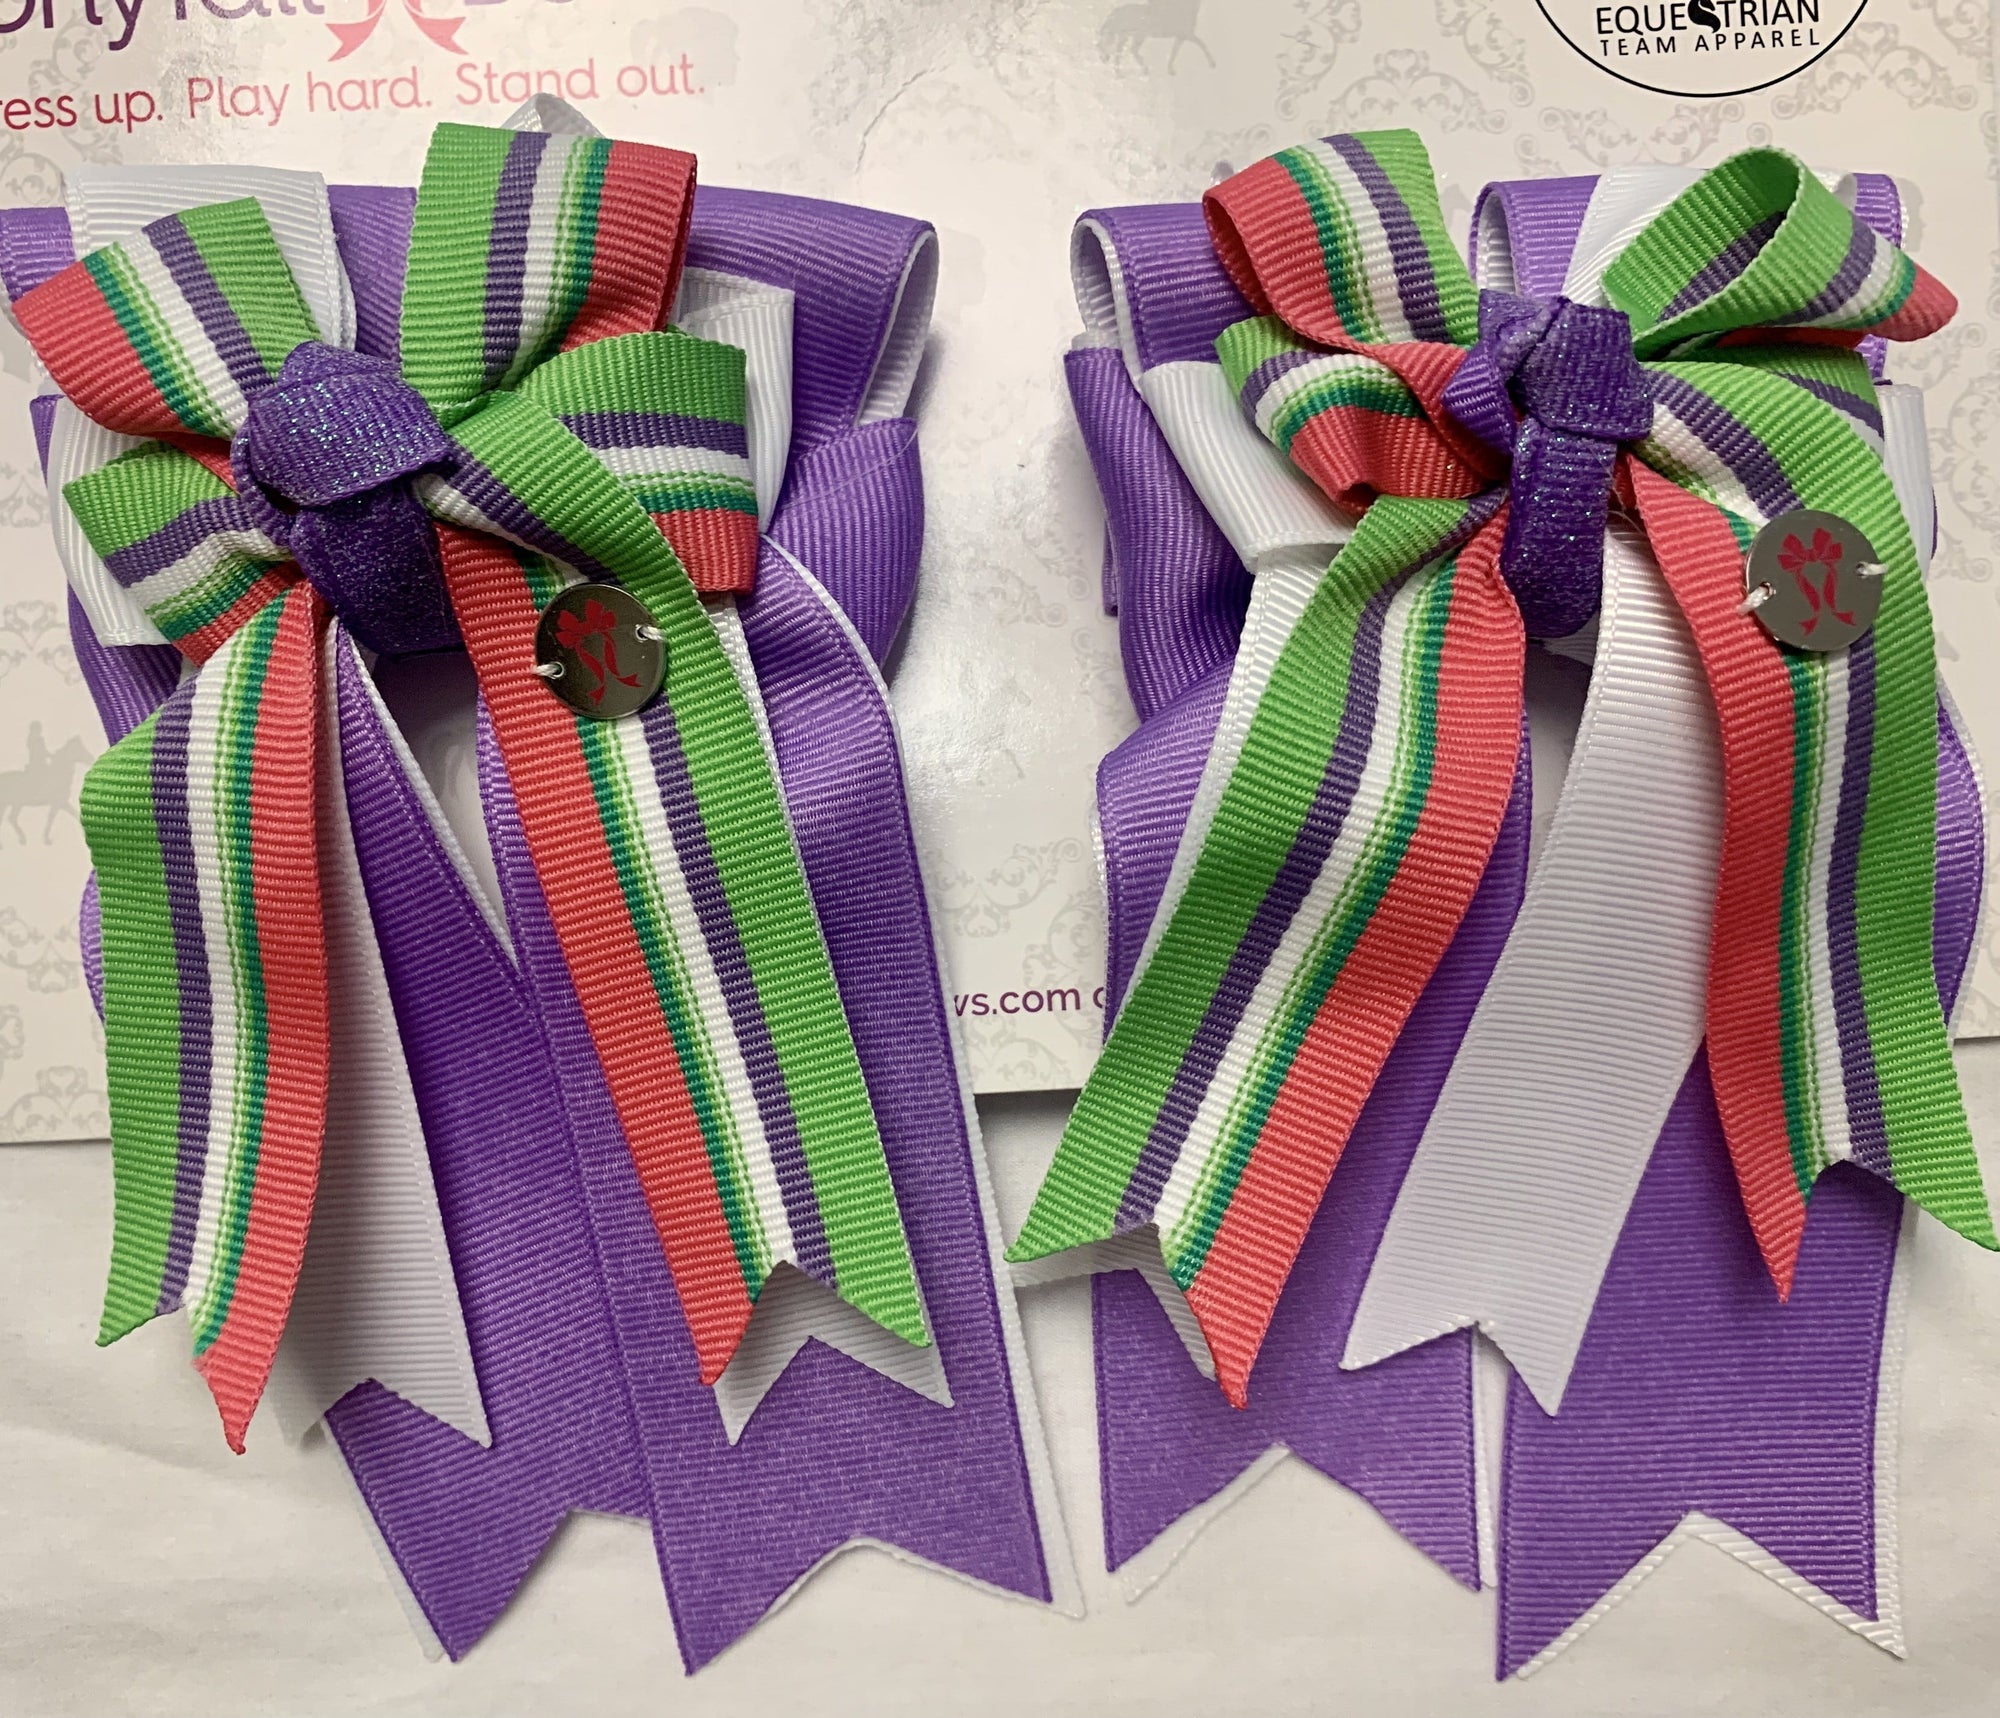 PonyTail Bows 3" Tails Jolly Rancher Bows equestrian team apparel online tack store mobile tack store custom farm apparel custom show stable clothing equestrian lifestyle horse show clothing riding clothes PonyTail Bows | Equestrian Hair Accessories horses equestrian tack store